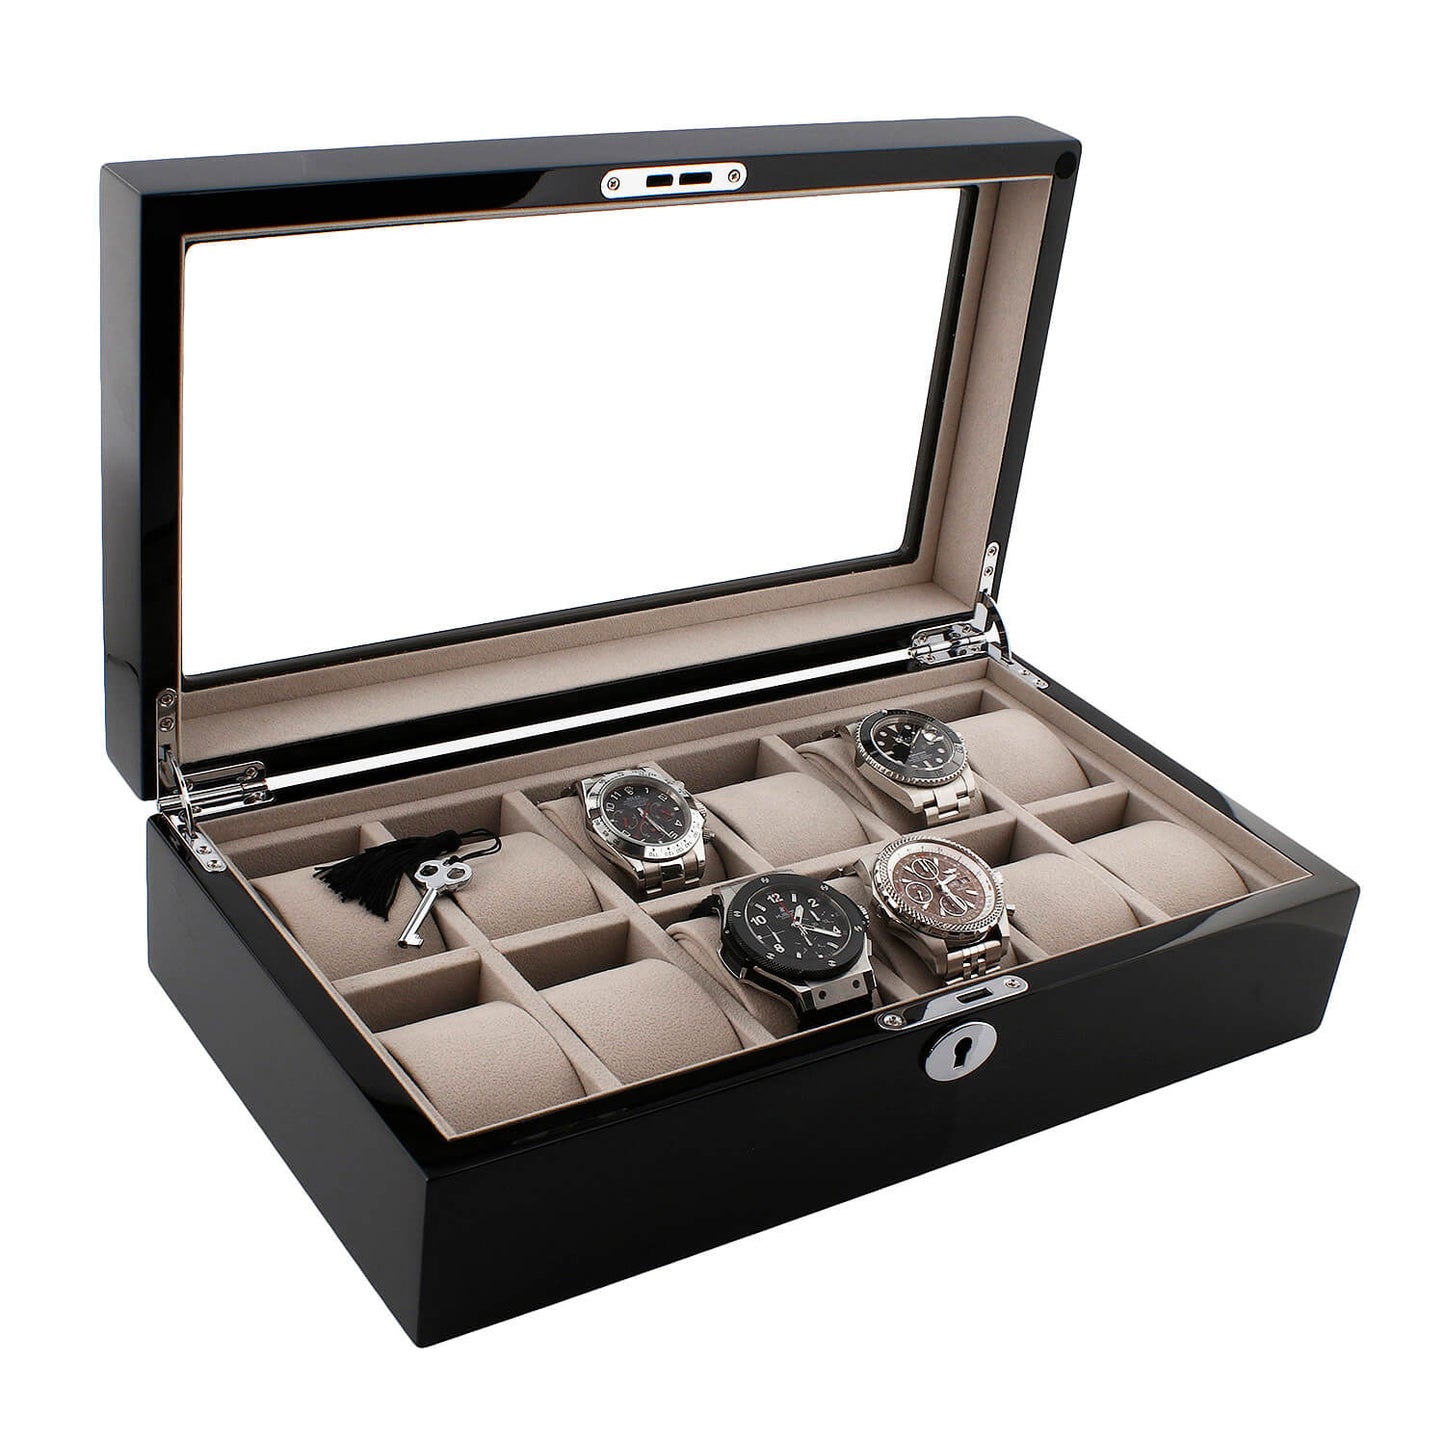 12 Watch Box in Piano Black Gloss Finish with Grey Luxury Lining by Aevitas